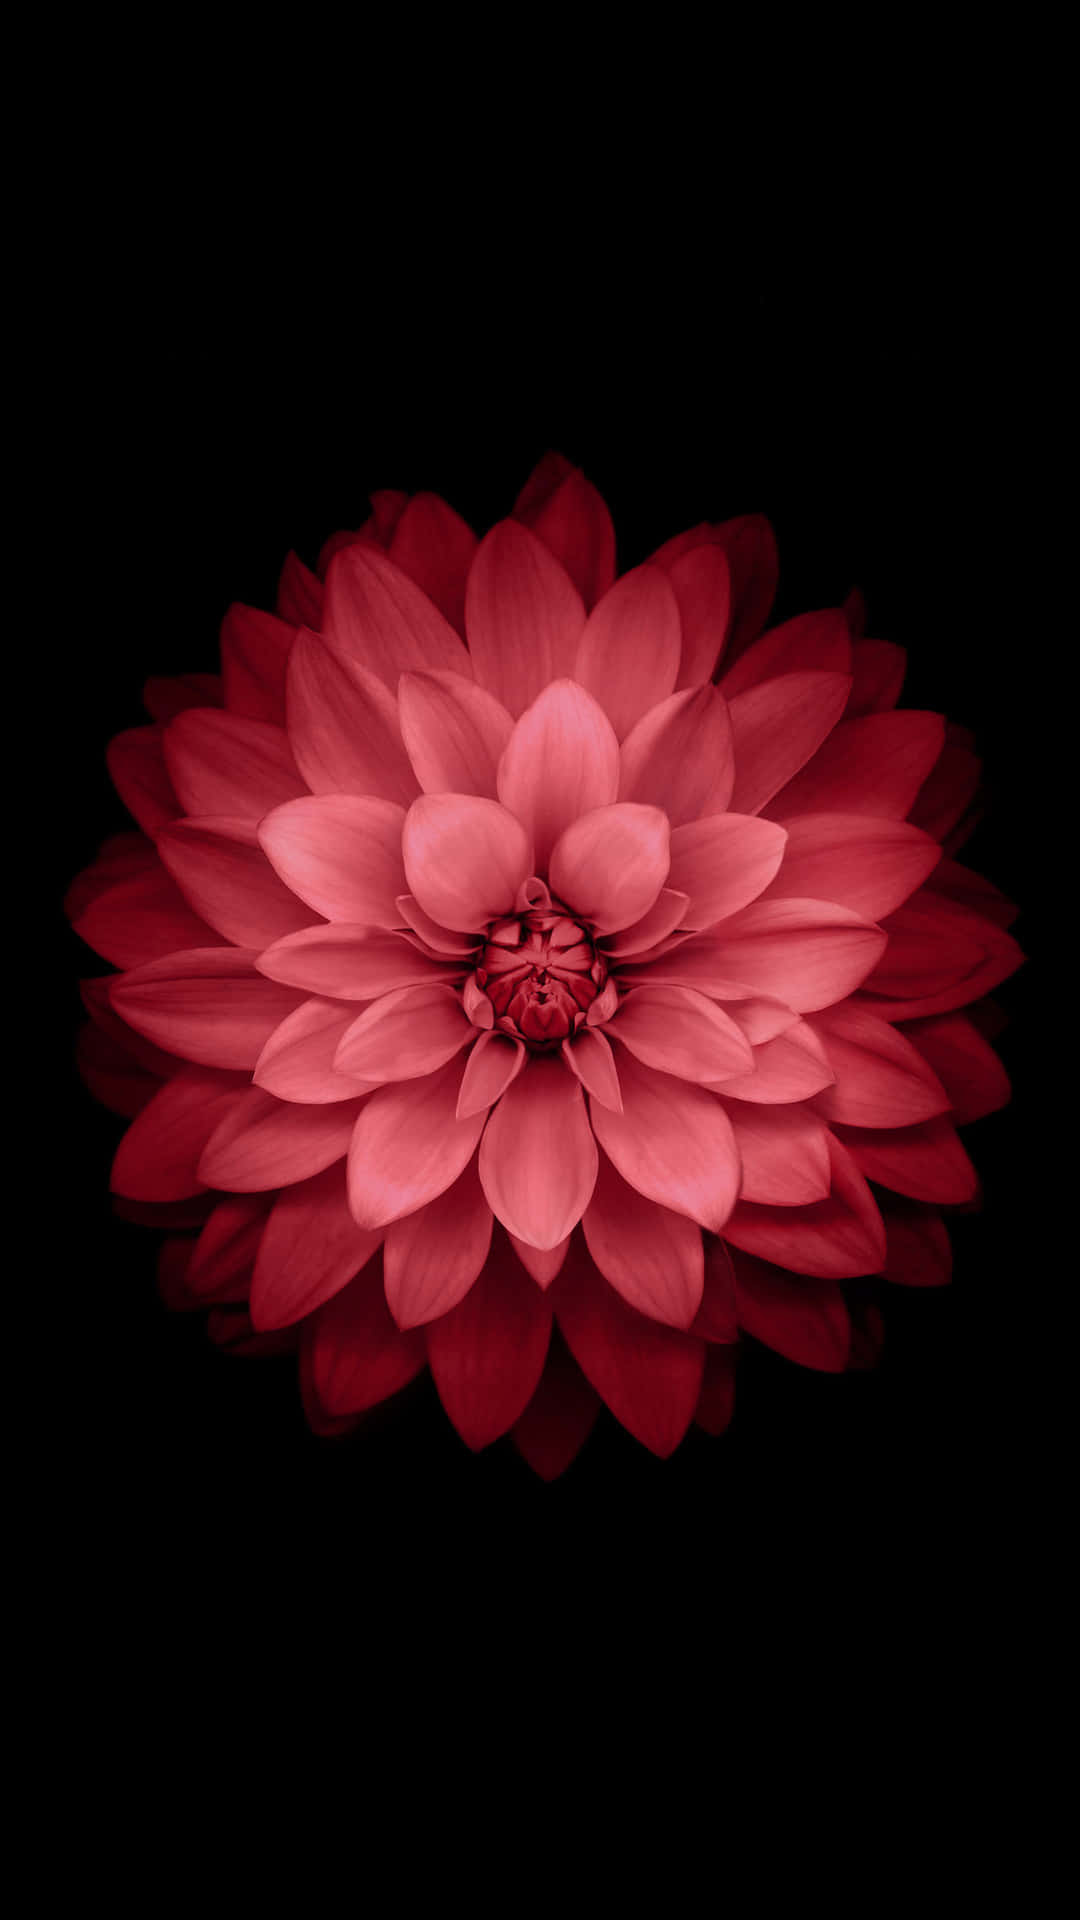 A Red Flower On A Black Background Wallpaper